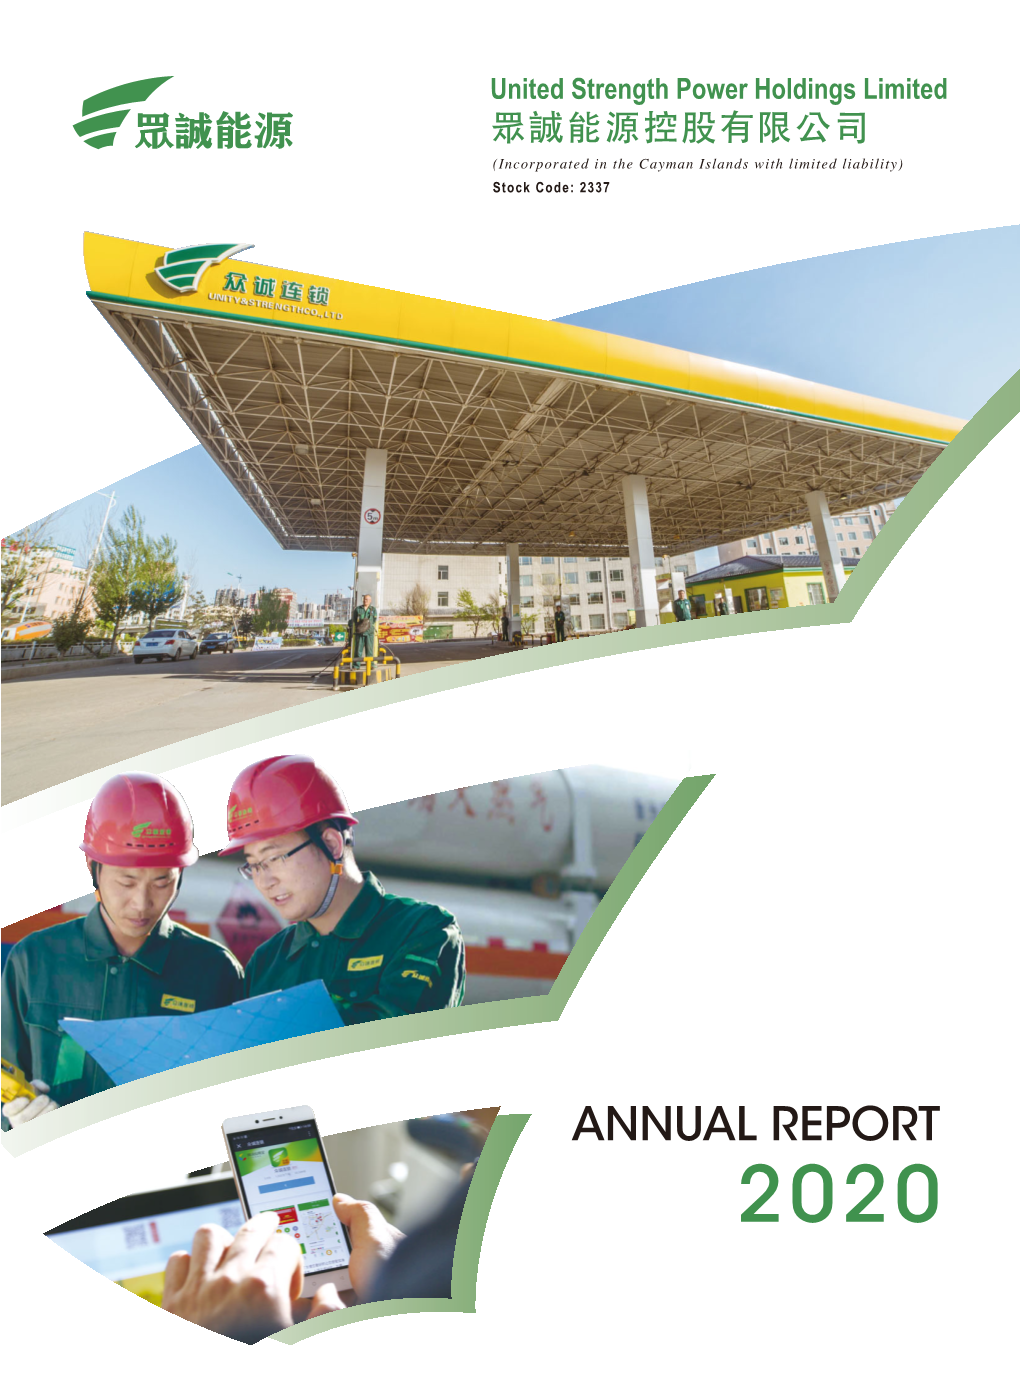 ANNUAL REPORT 2020 Contents